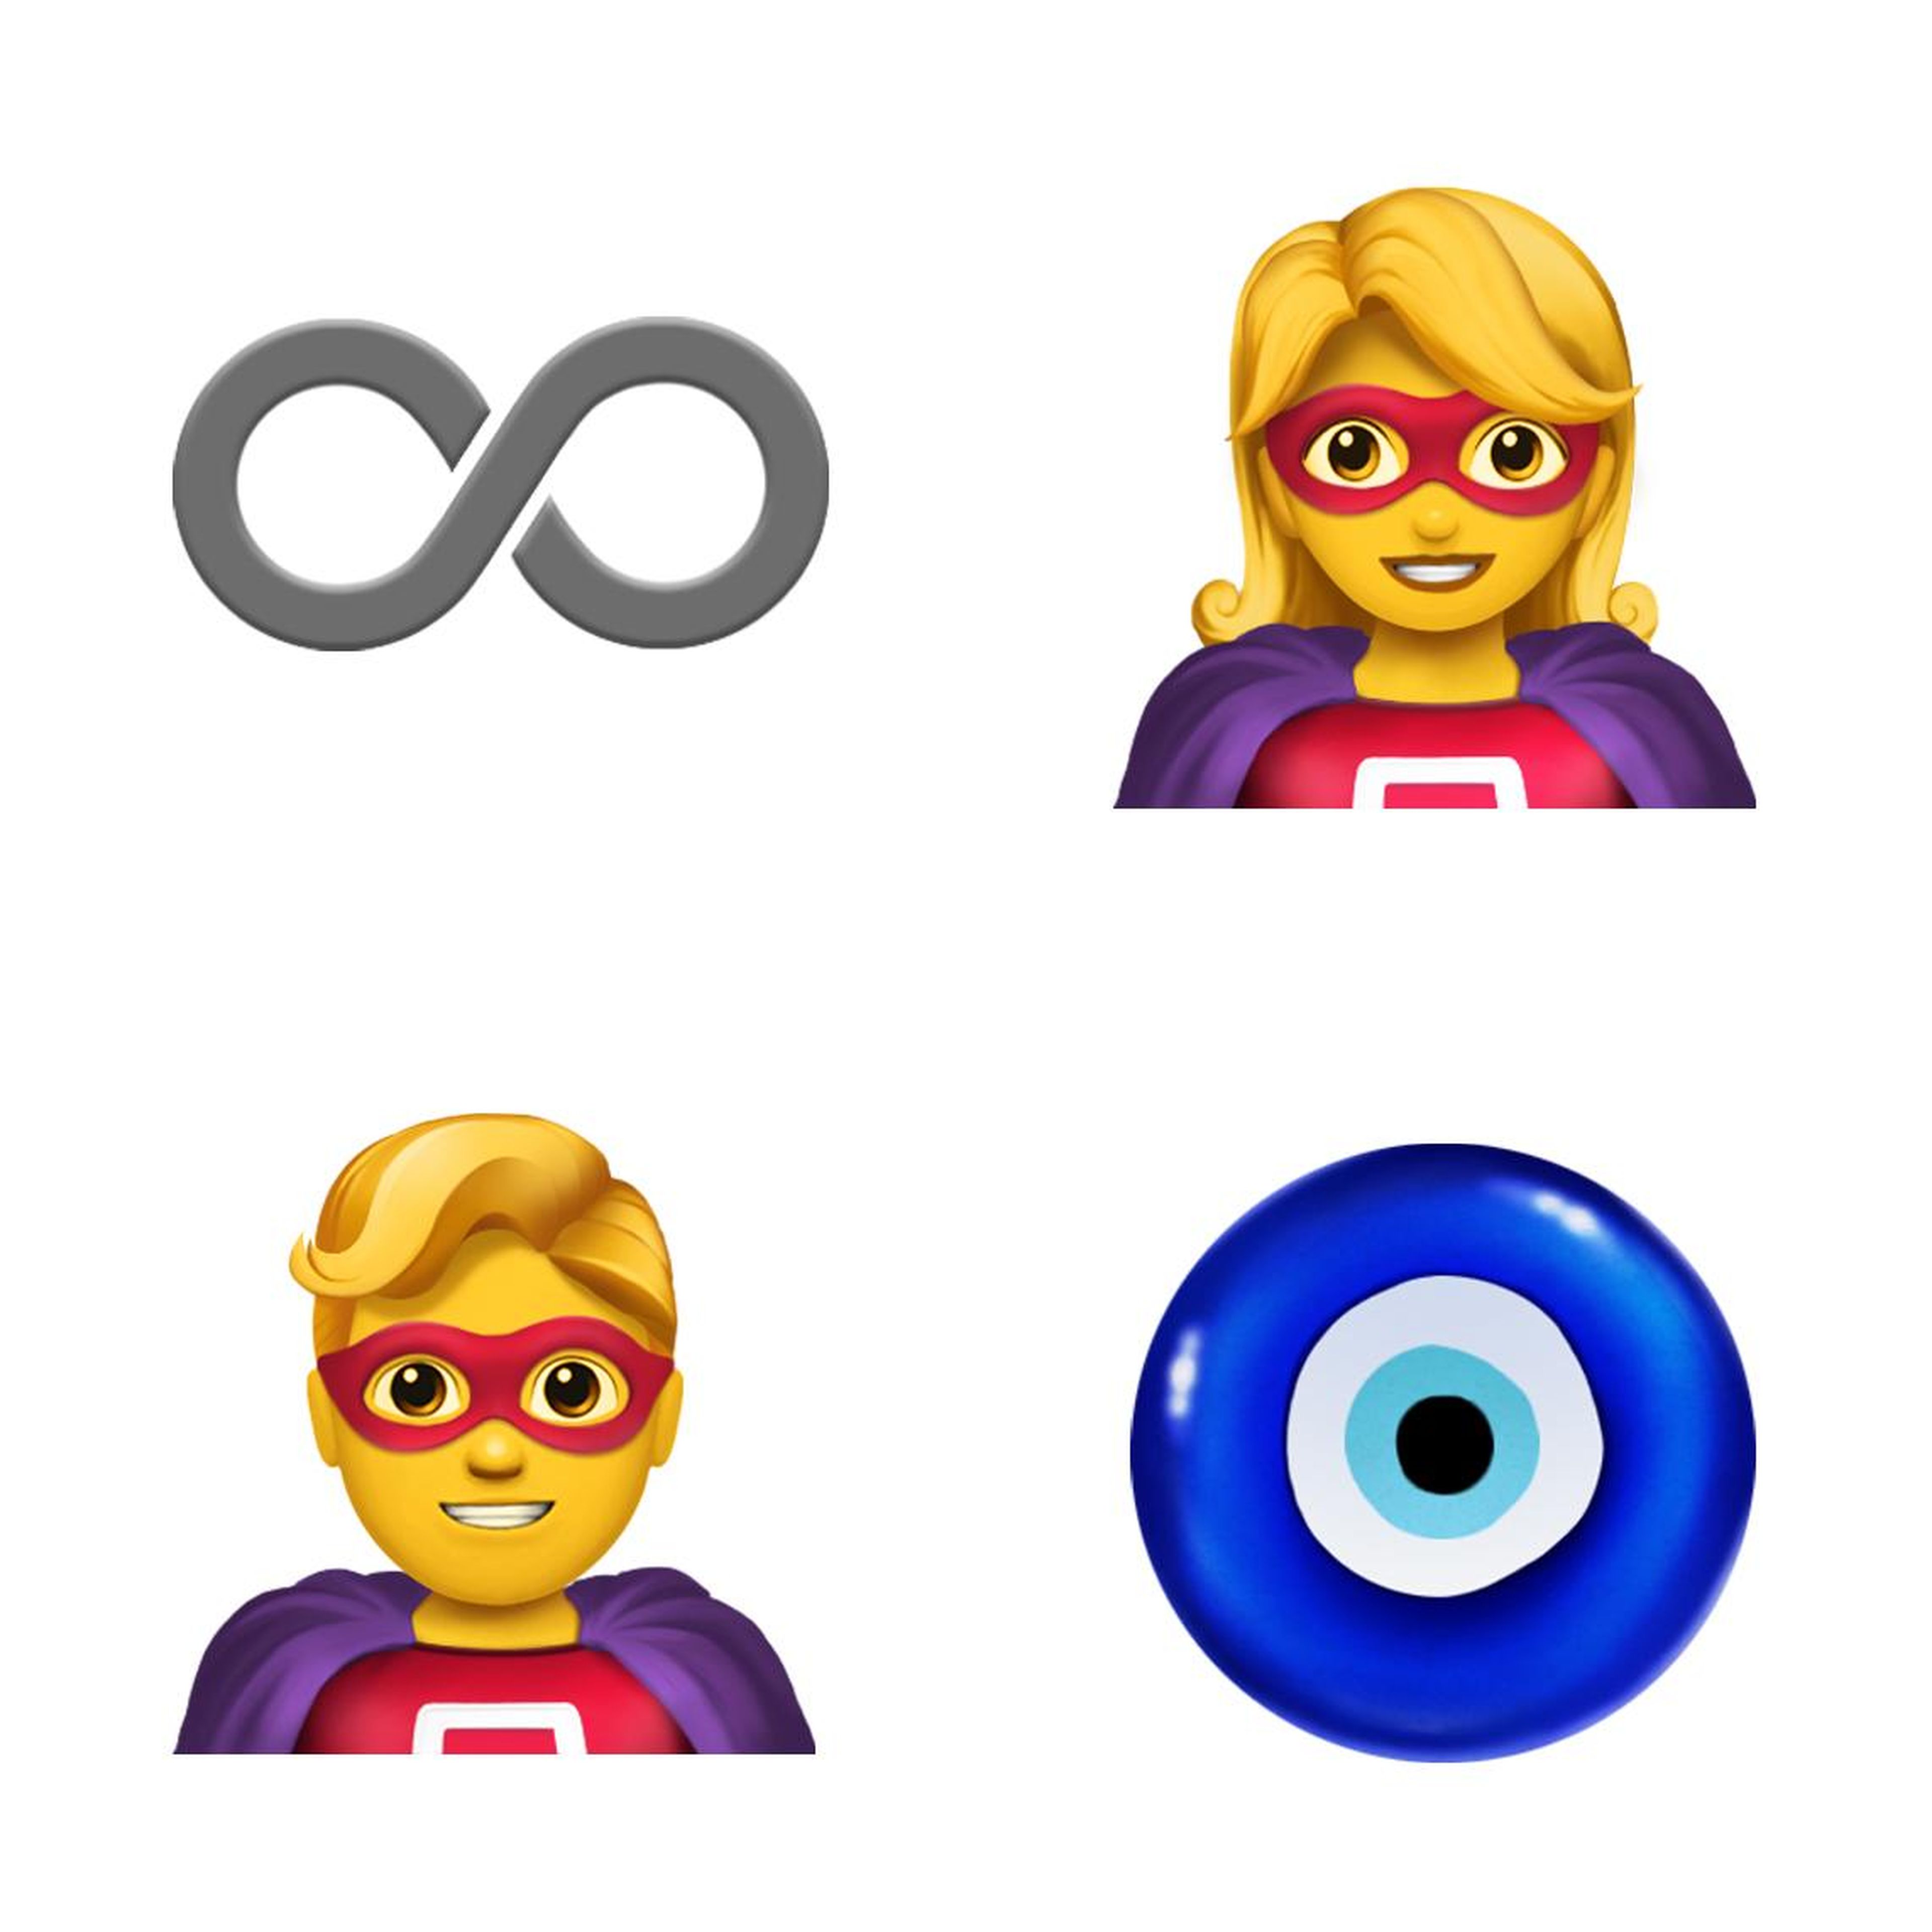 There will be an infinity symbol, male and female superheroes, and a nazar amulet, which protects against the evil eye.